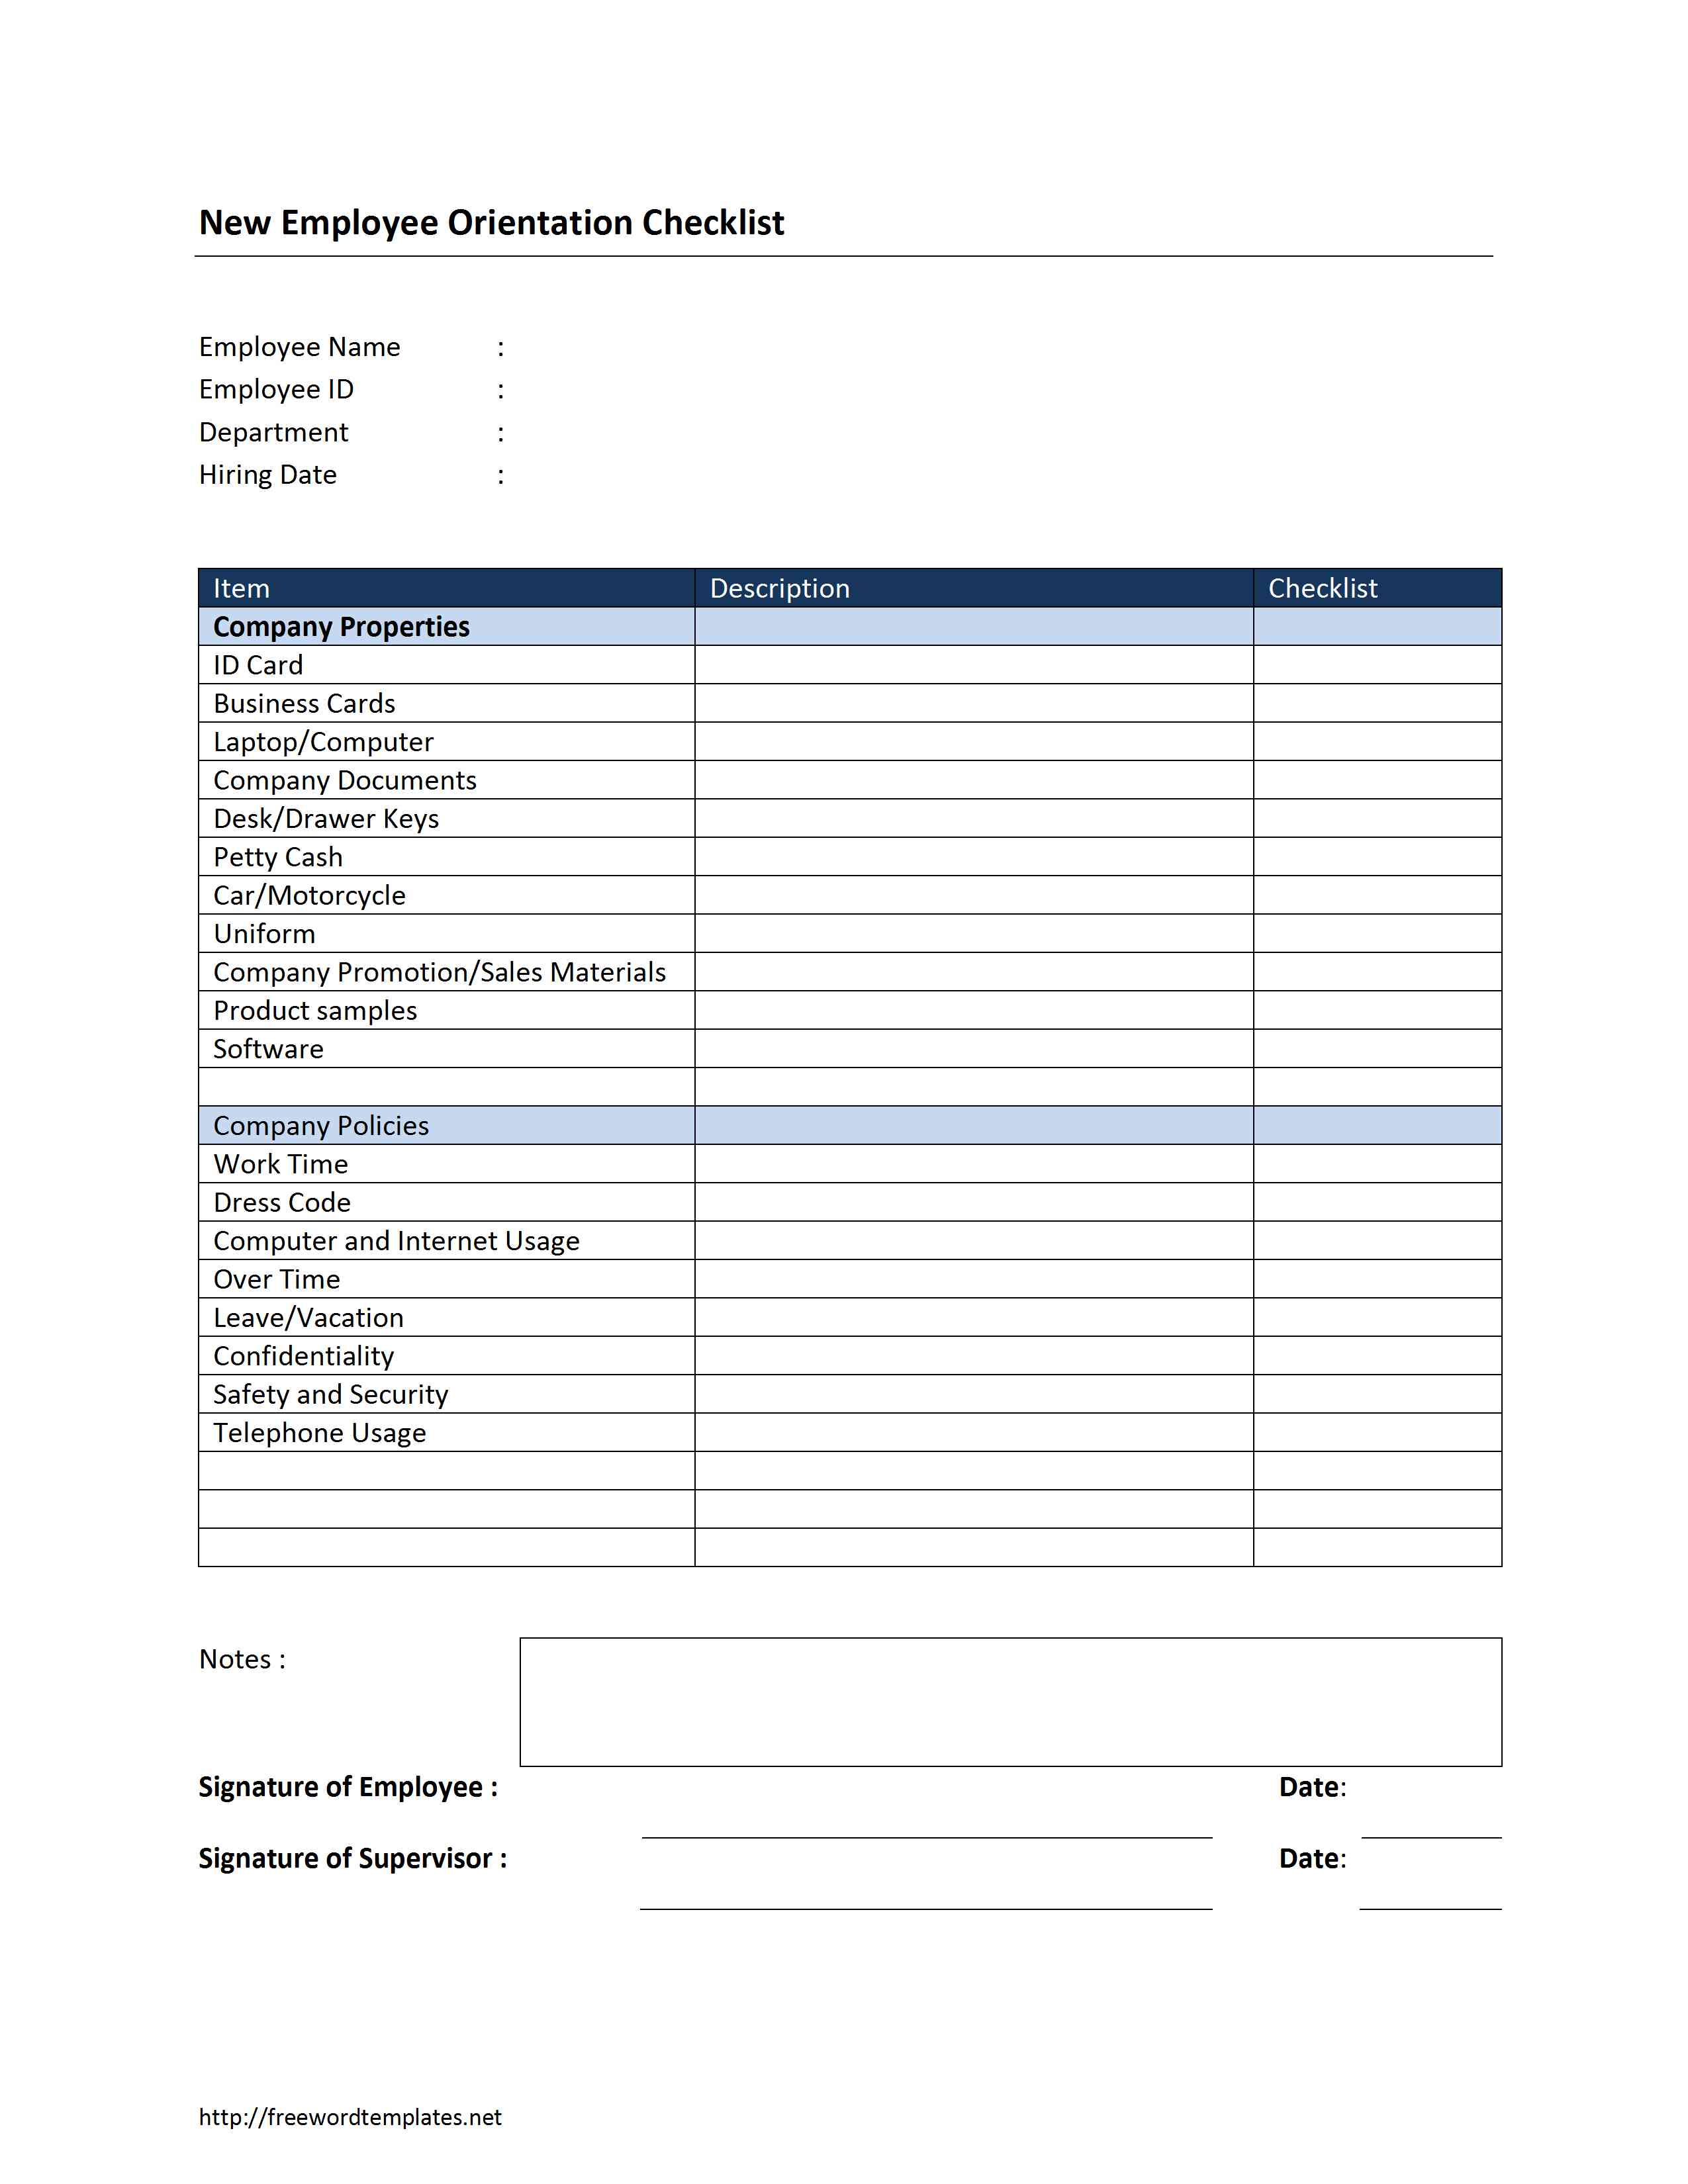 New Employee Orientation Checklist Template for Word